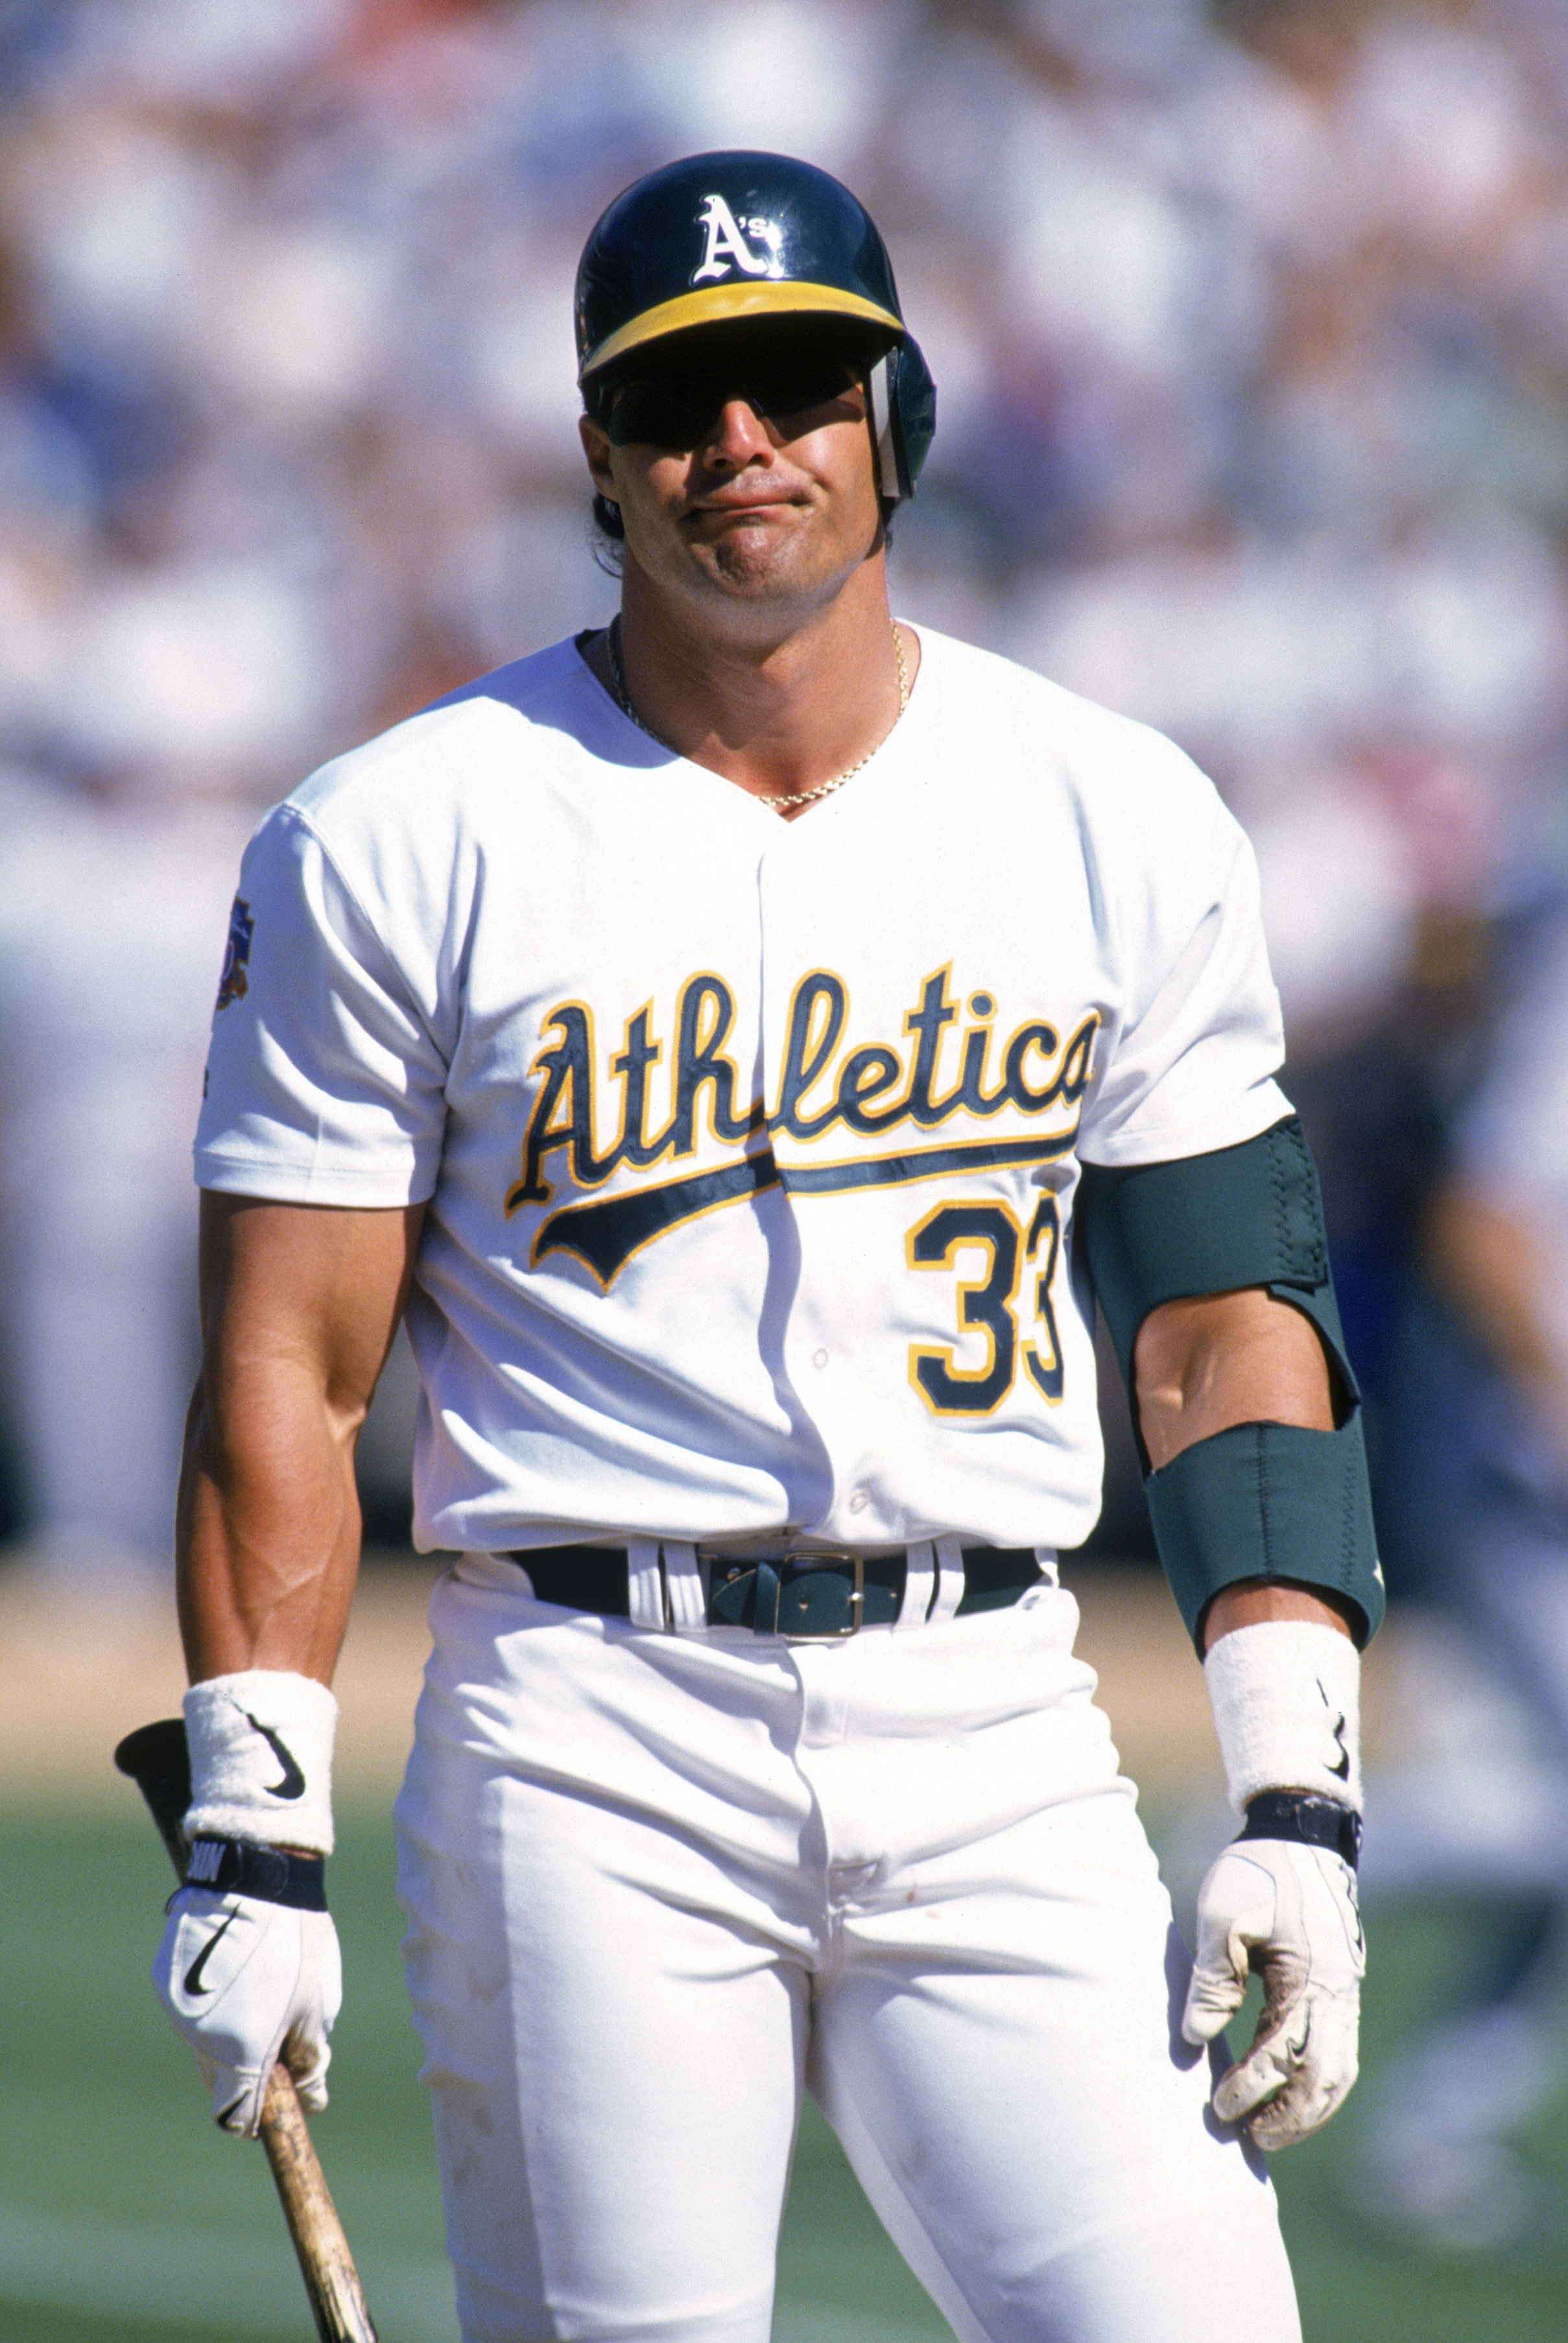 OAKLAND, CA - APRIL 26:  Jose Canseco #33 of the Oakland Athletics reacts during his at bat against the Kansas City Royals at Oakland-Alameda County Coliseum on April 26, 1997 in Oakland, California.  The Athletics won 7-6.  (Photo by Otto Greule Jr/Getty